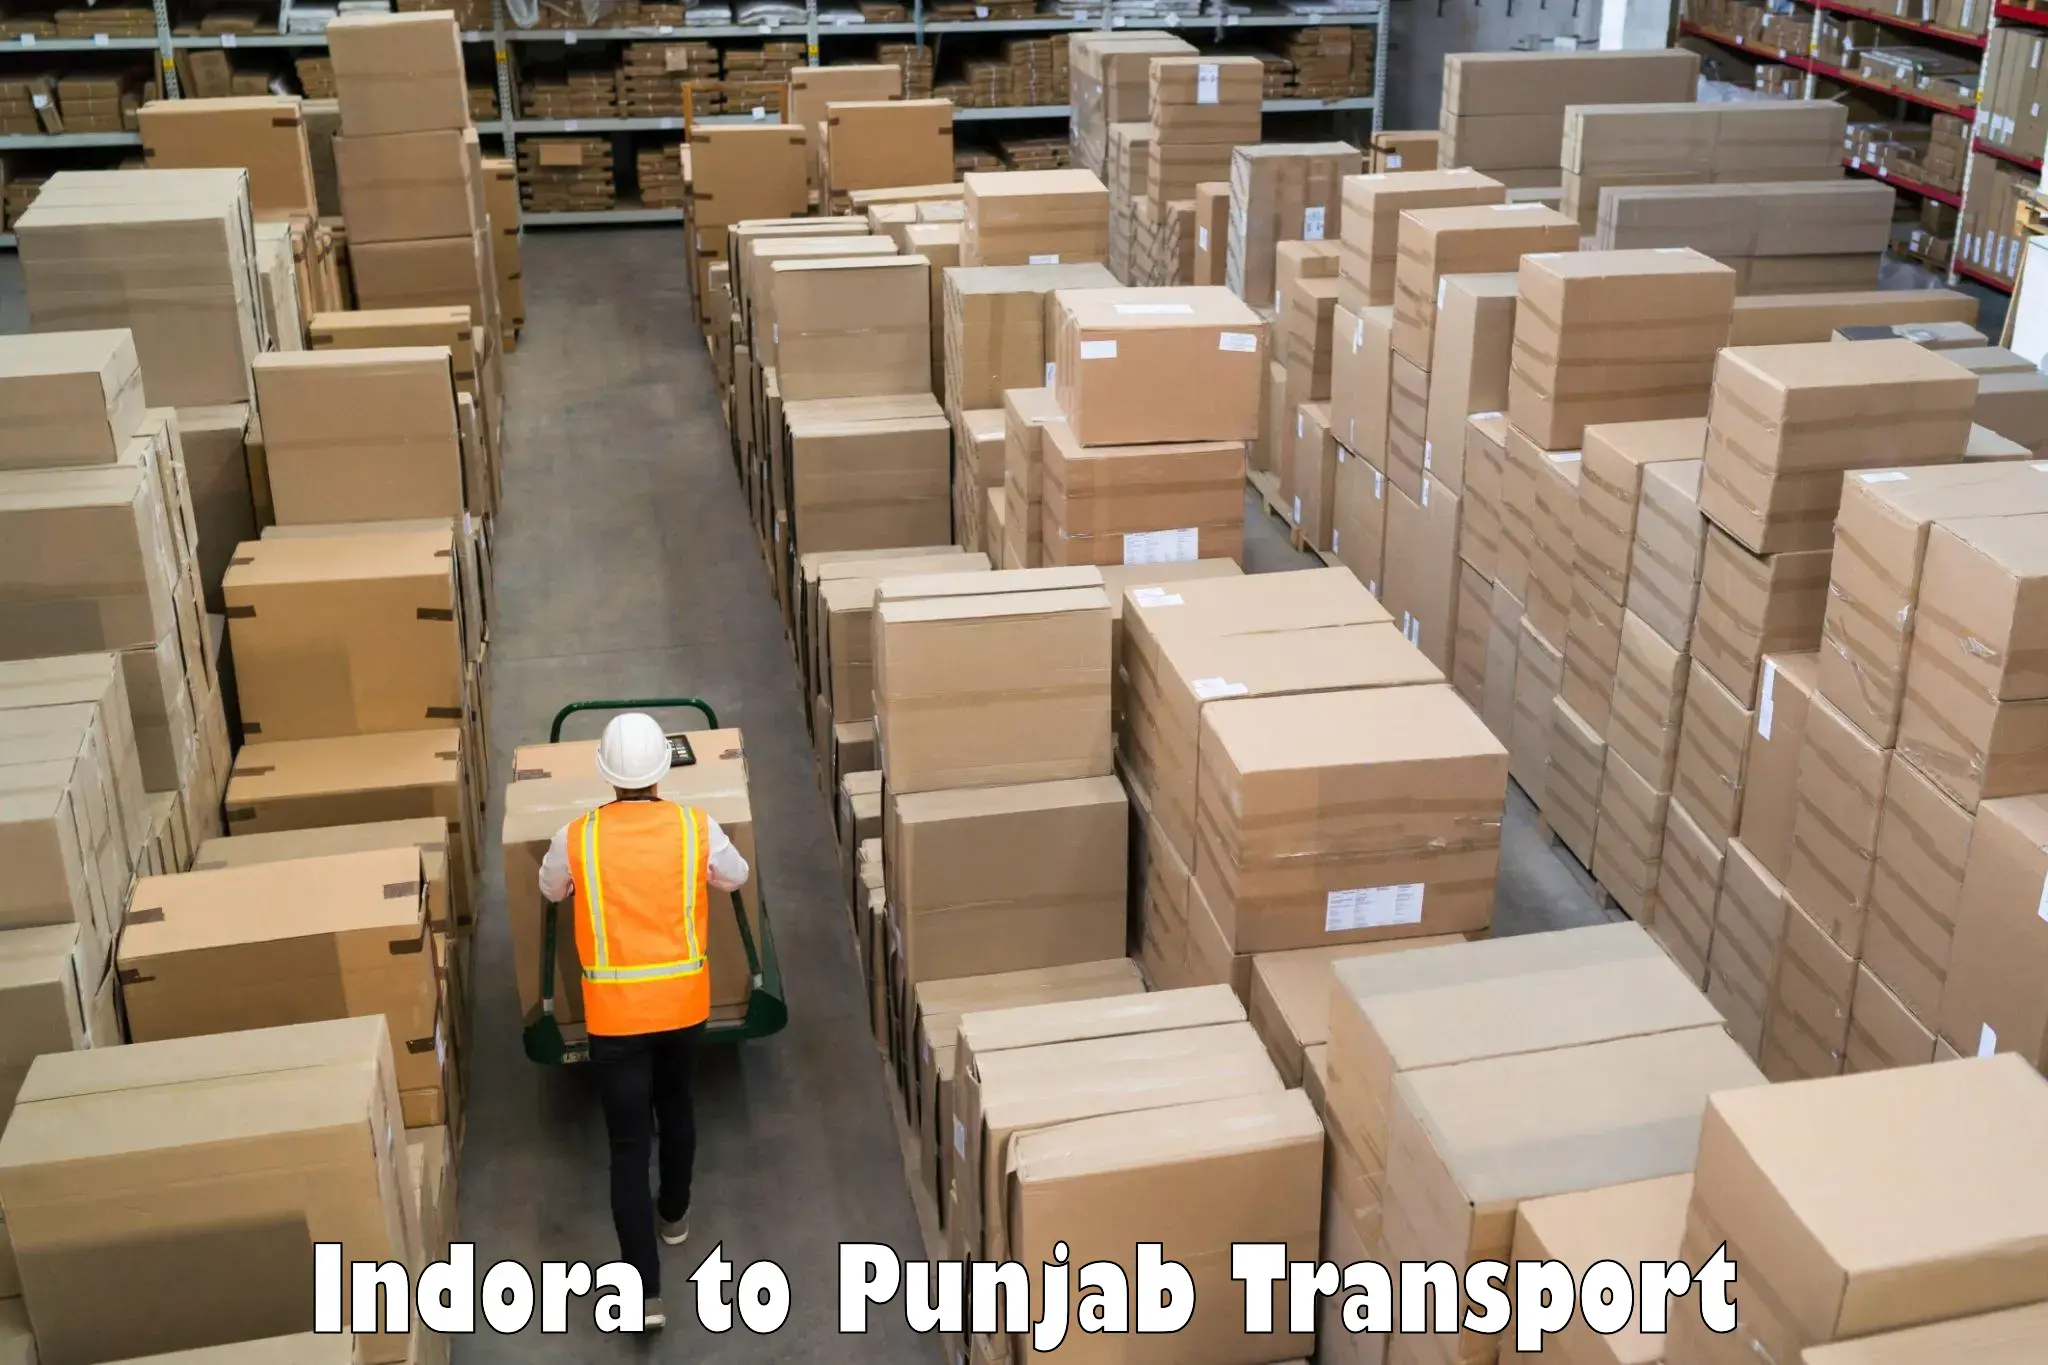 Transport shared services in Indora to Punjab